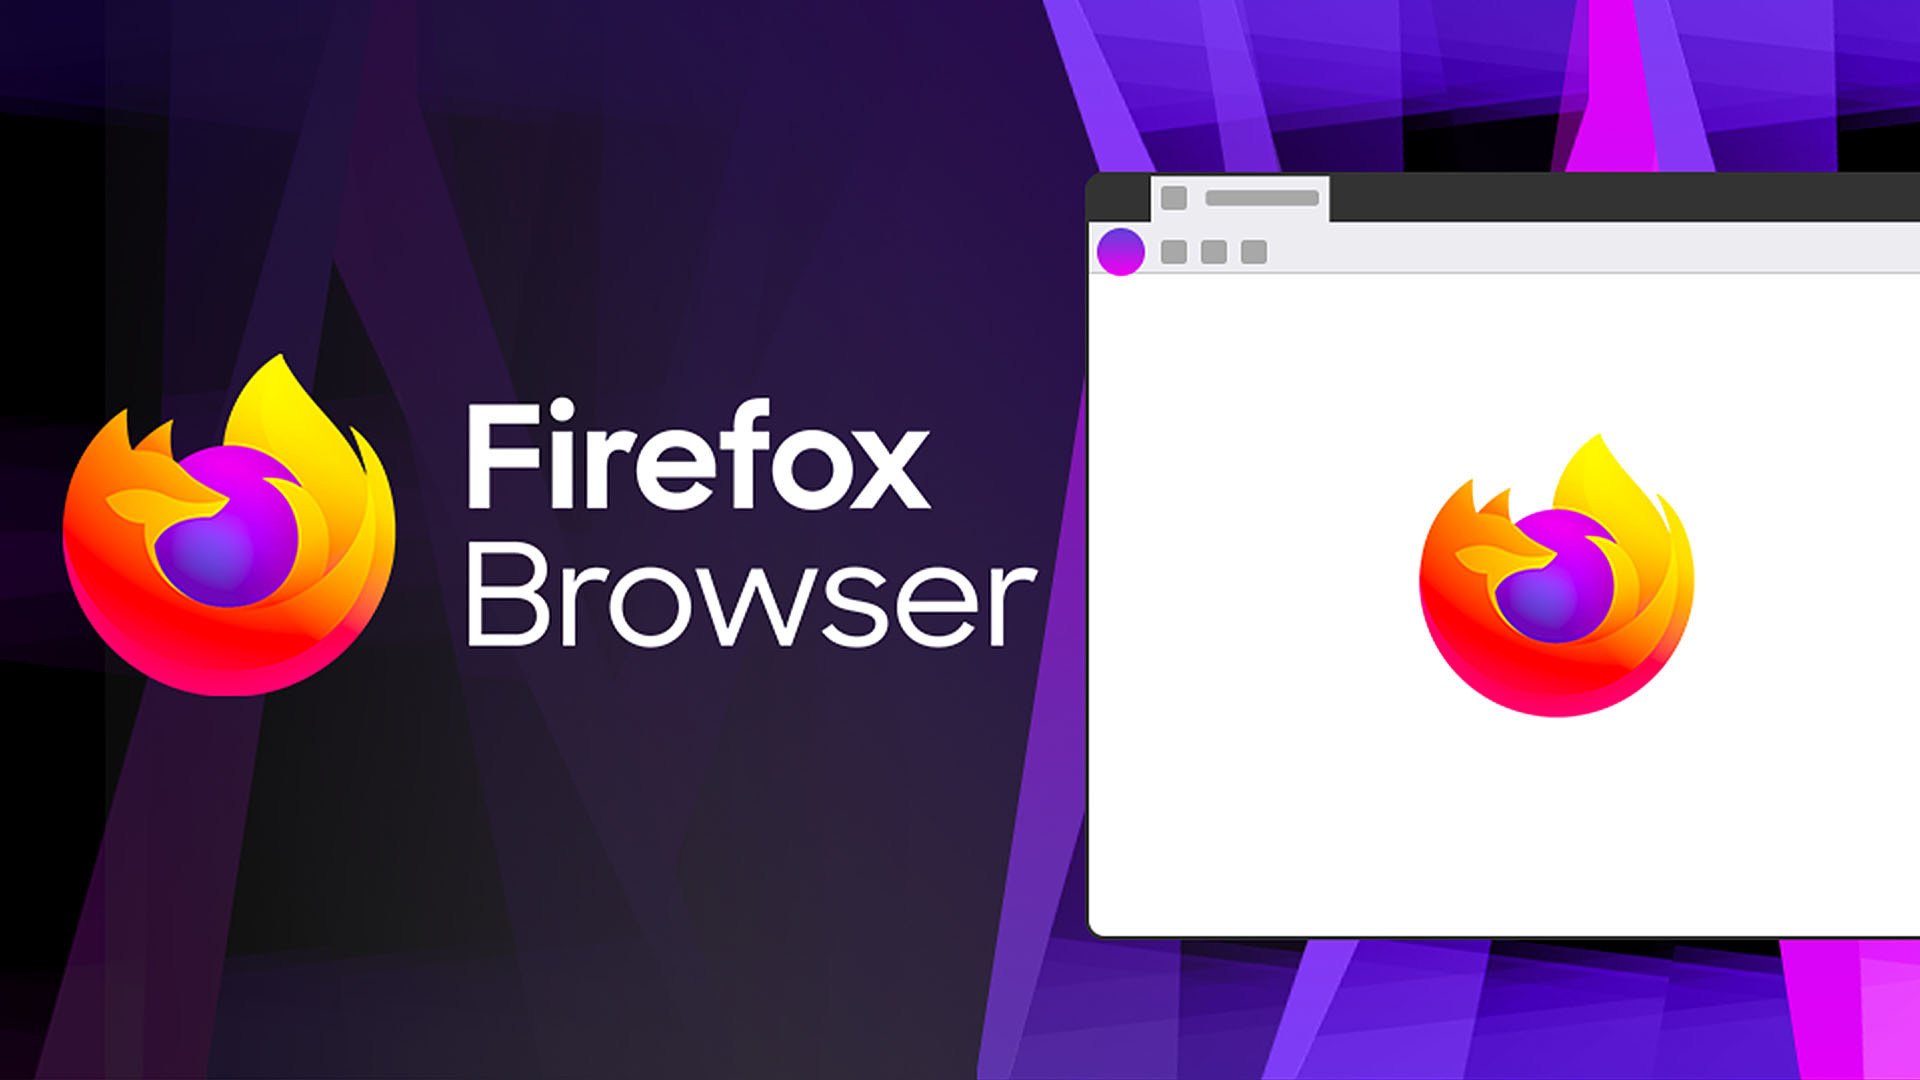 Firefox: Mozilla provides a patch against actively exploited vulnerabilities